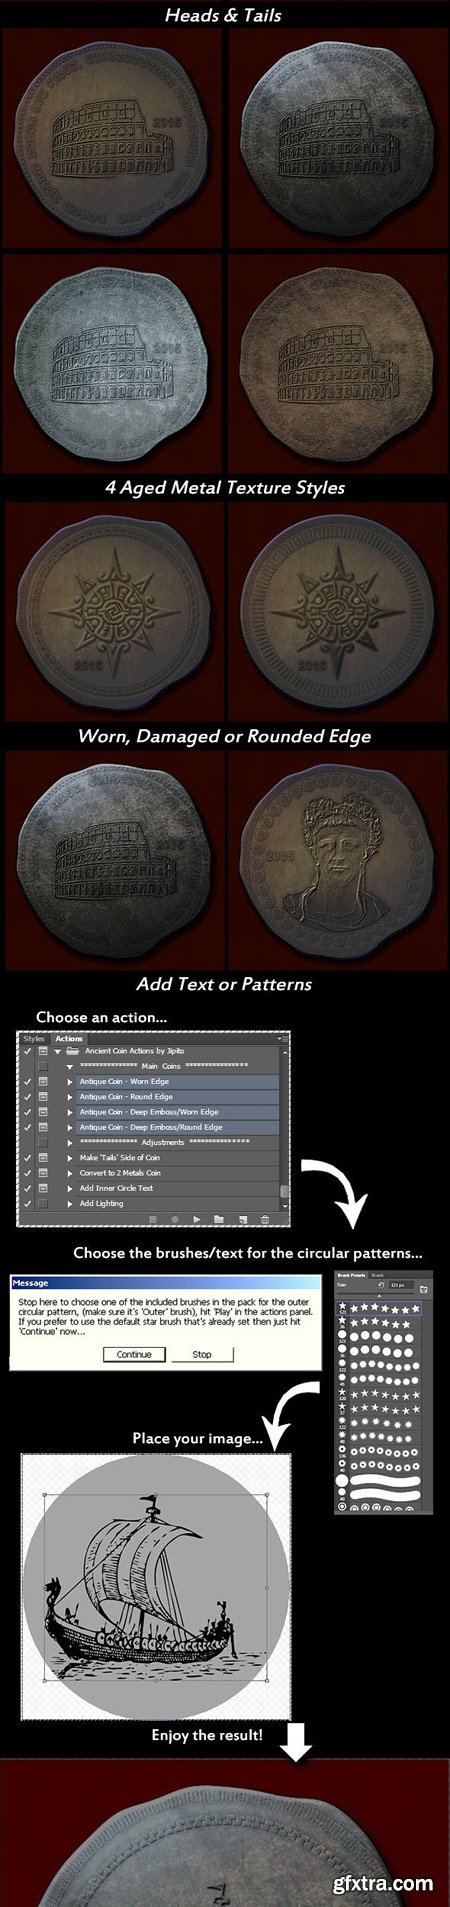 GraphicRiver Ancient Coin Creator Kit 13341392